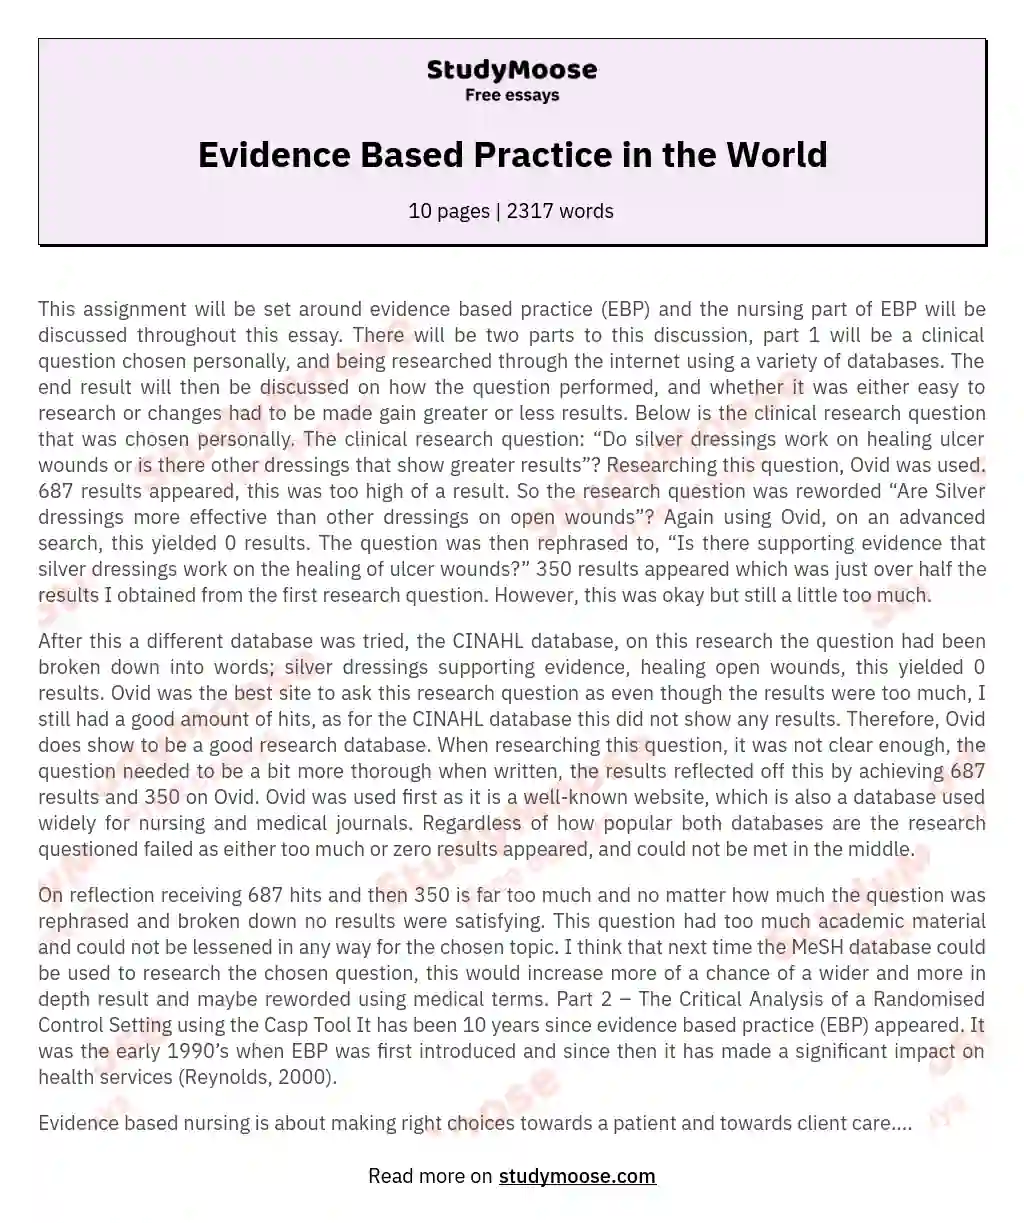 Evidence Based Practice in the World